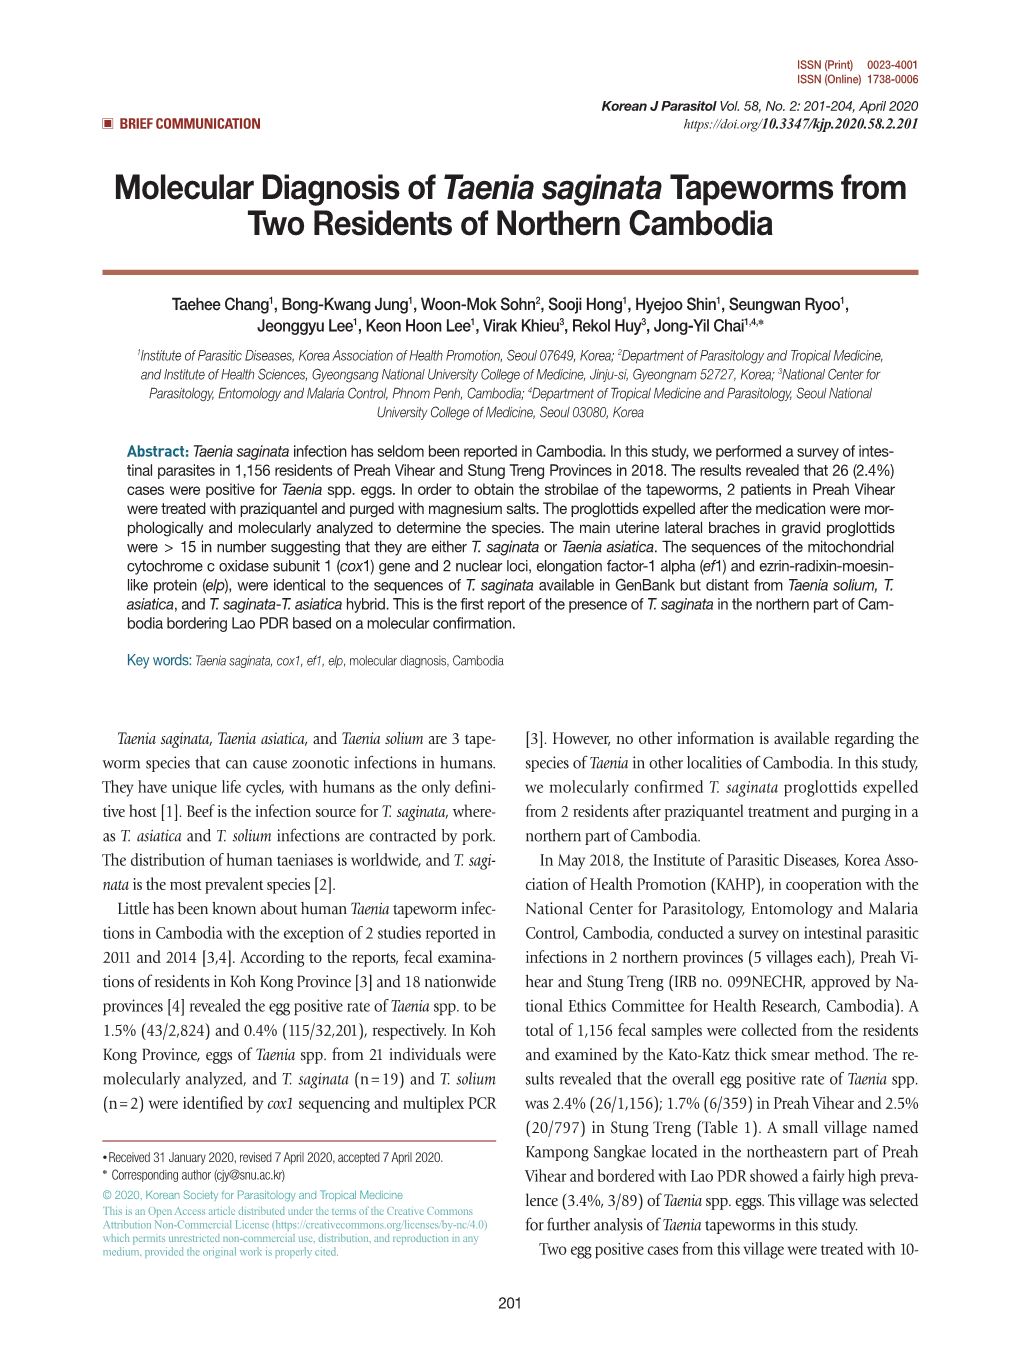 Molecular Diagnosis of Taenia Saginata Tapeworms from Two Residents of Northern Cambodia